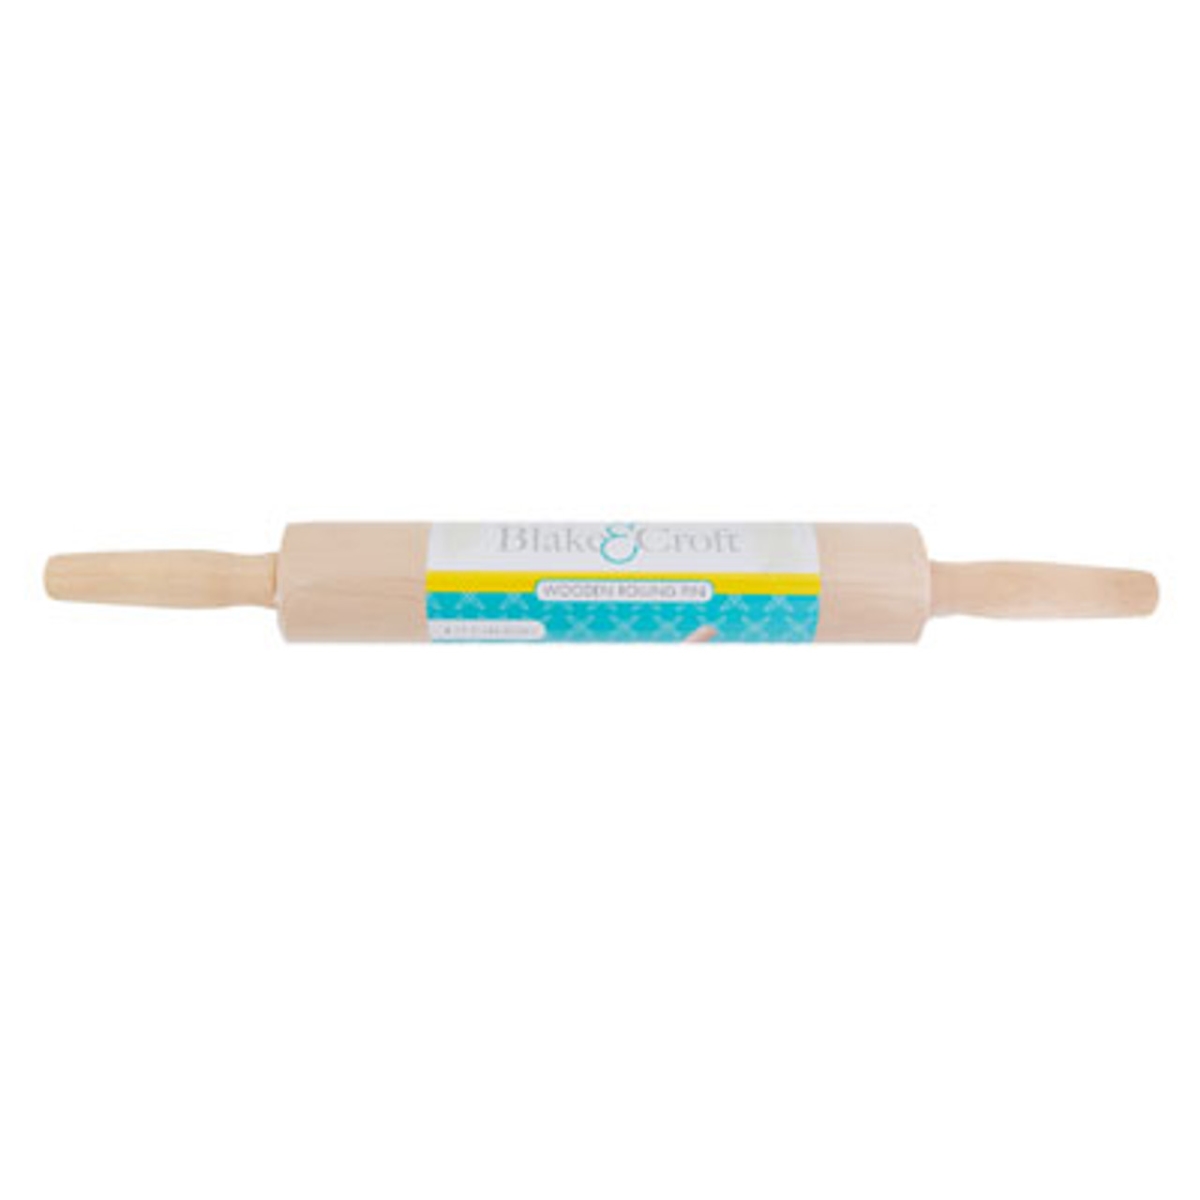 Picture of Regent Products G25984 17.5 in. Wood Rolling Pin with Kitchen Sleevecard